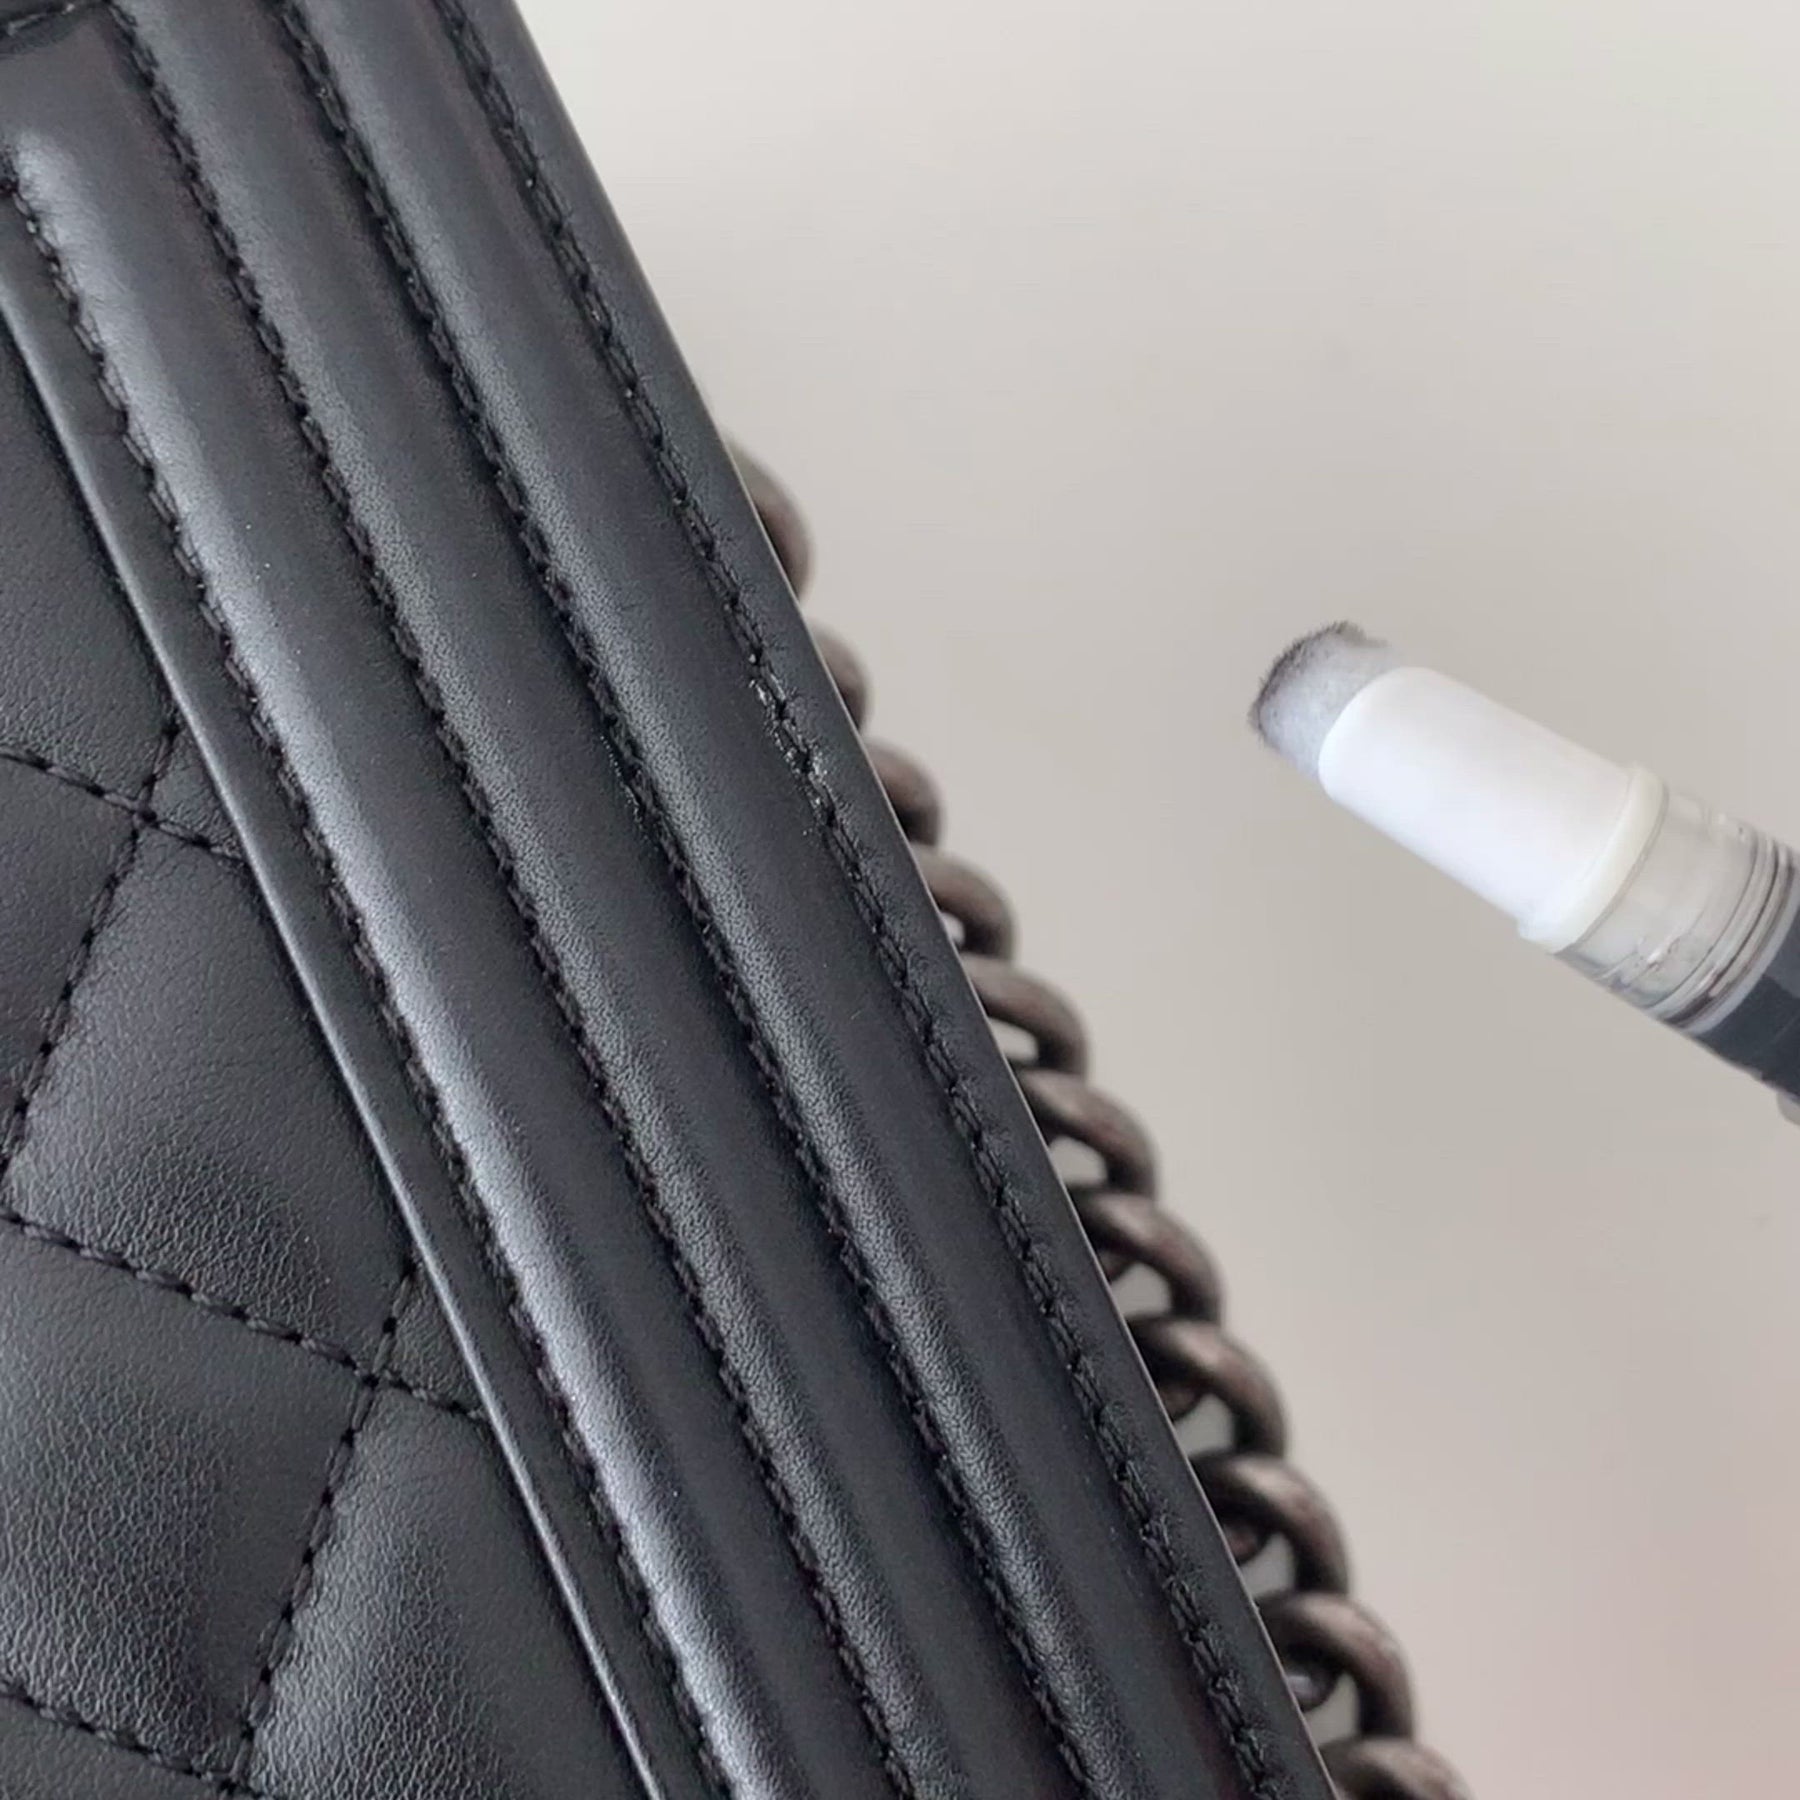 Luxe Bag Spa's leather touchup pen is available on www.Luxebagspa